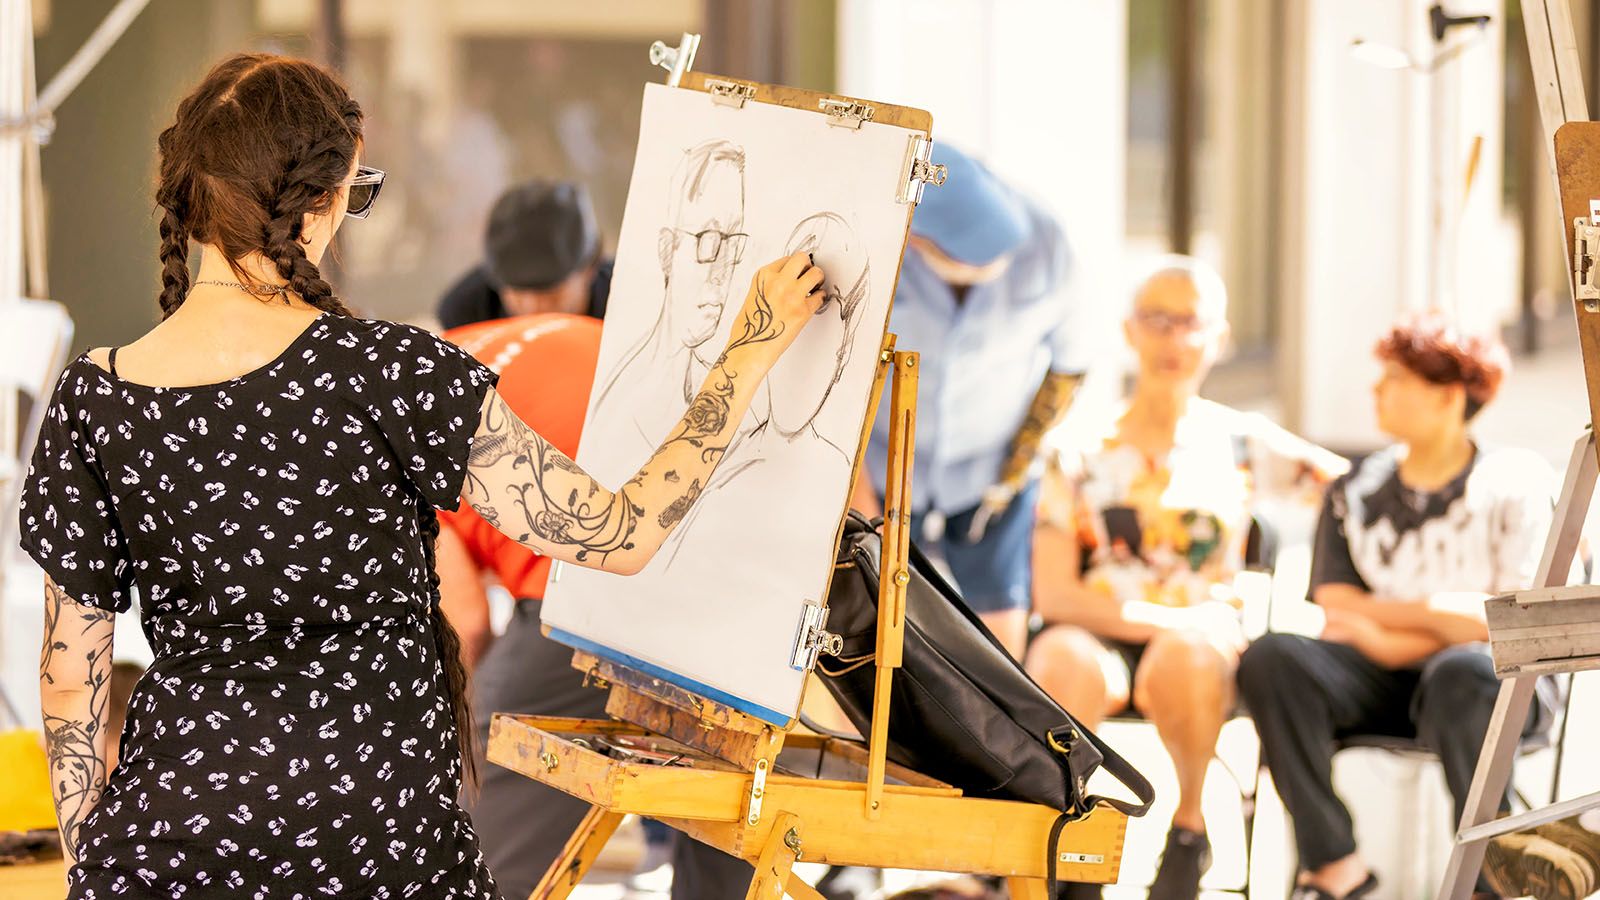 From getting your portrait done to listening to local musicians, there’s sure to be something for you at Taste of the Arts, which returns downtown on Saturday, Aug. 26.